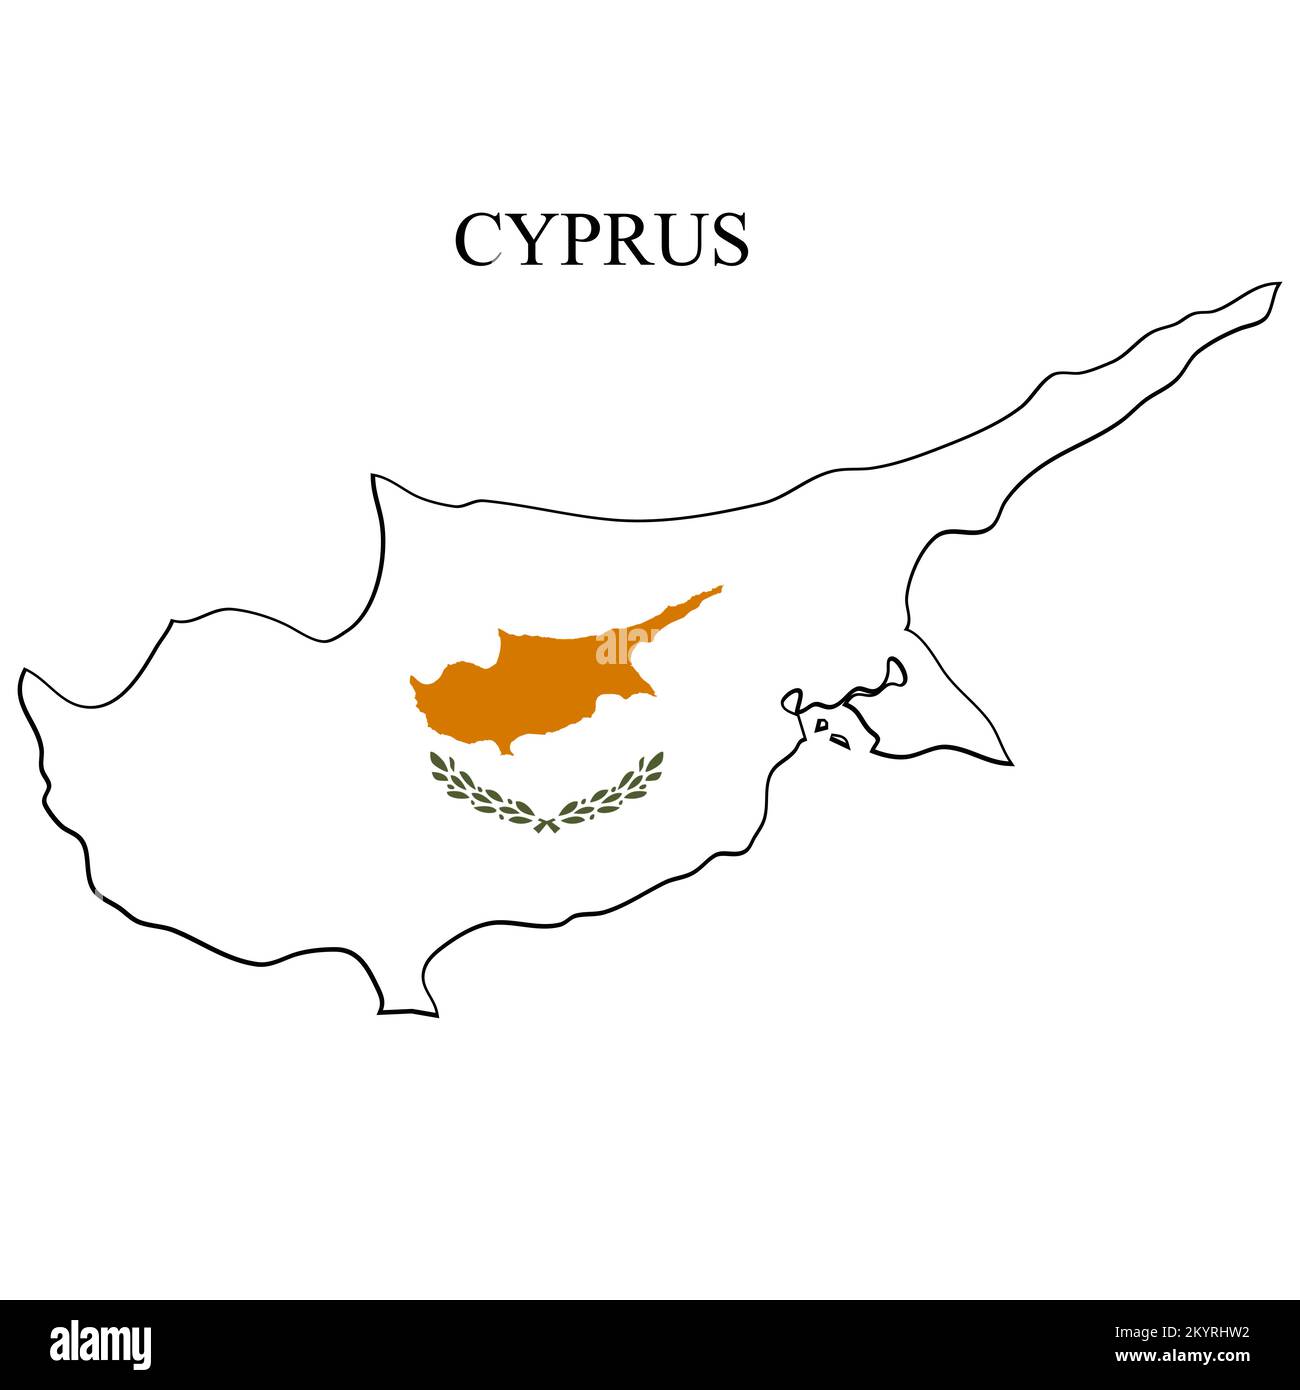 Cyprus map vector illustration. Global economy. Famous country. West Asia. Stock Vector